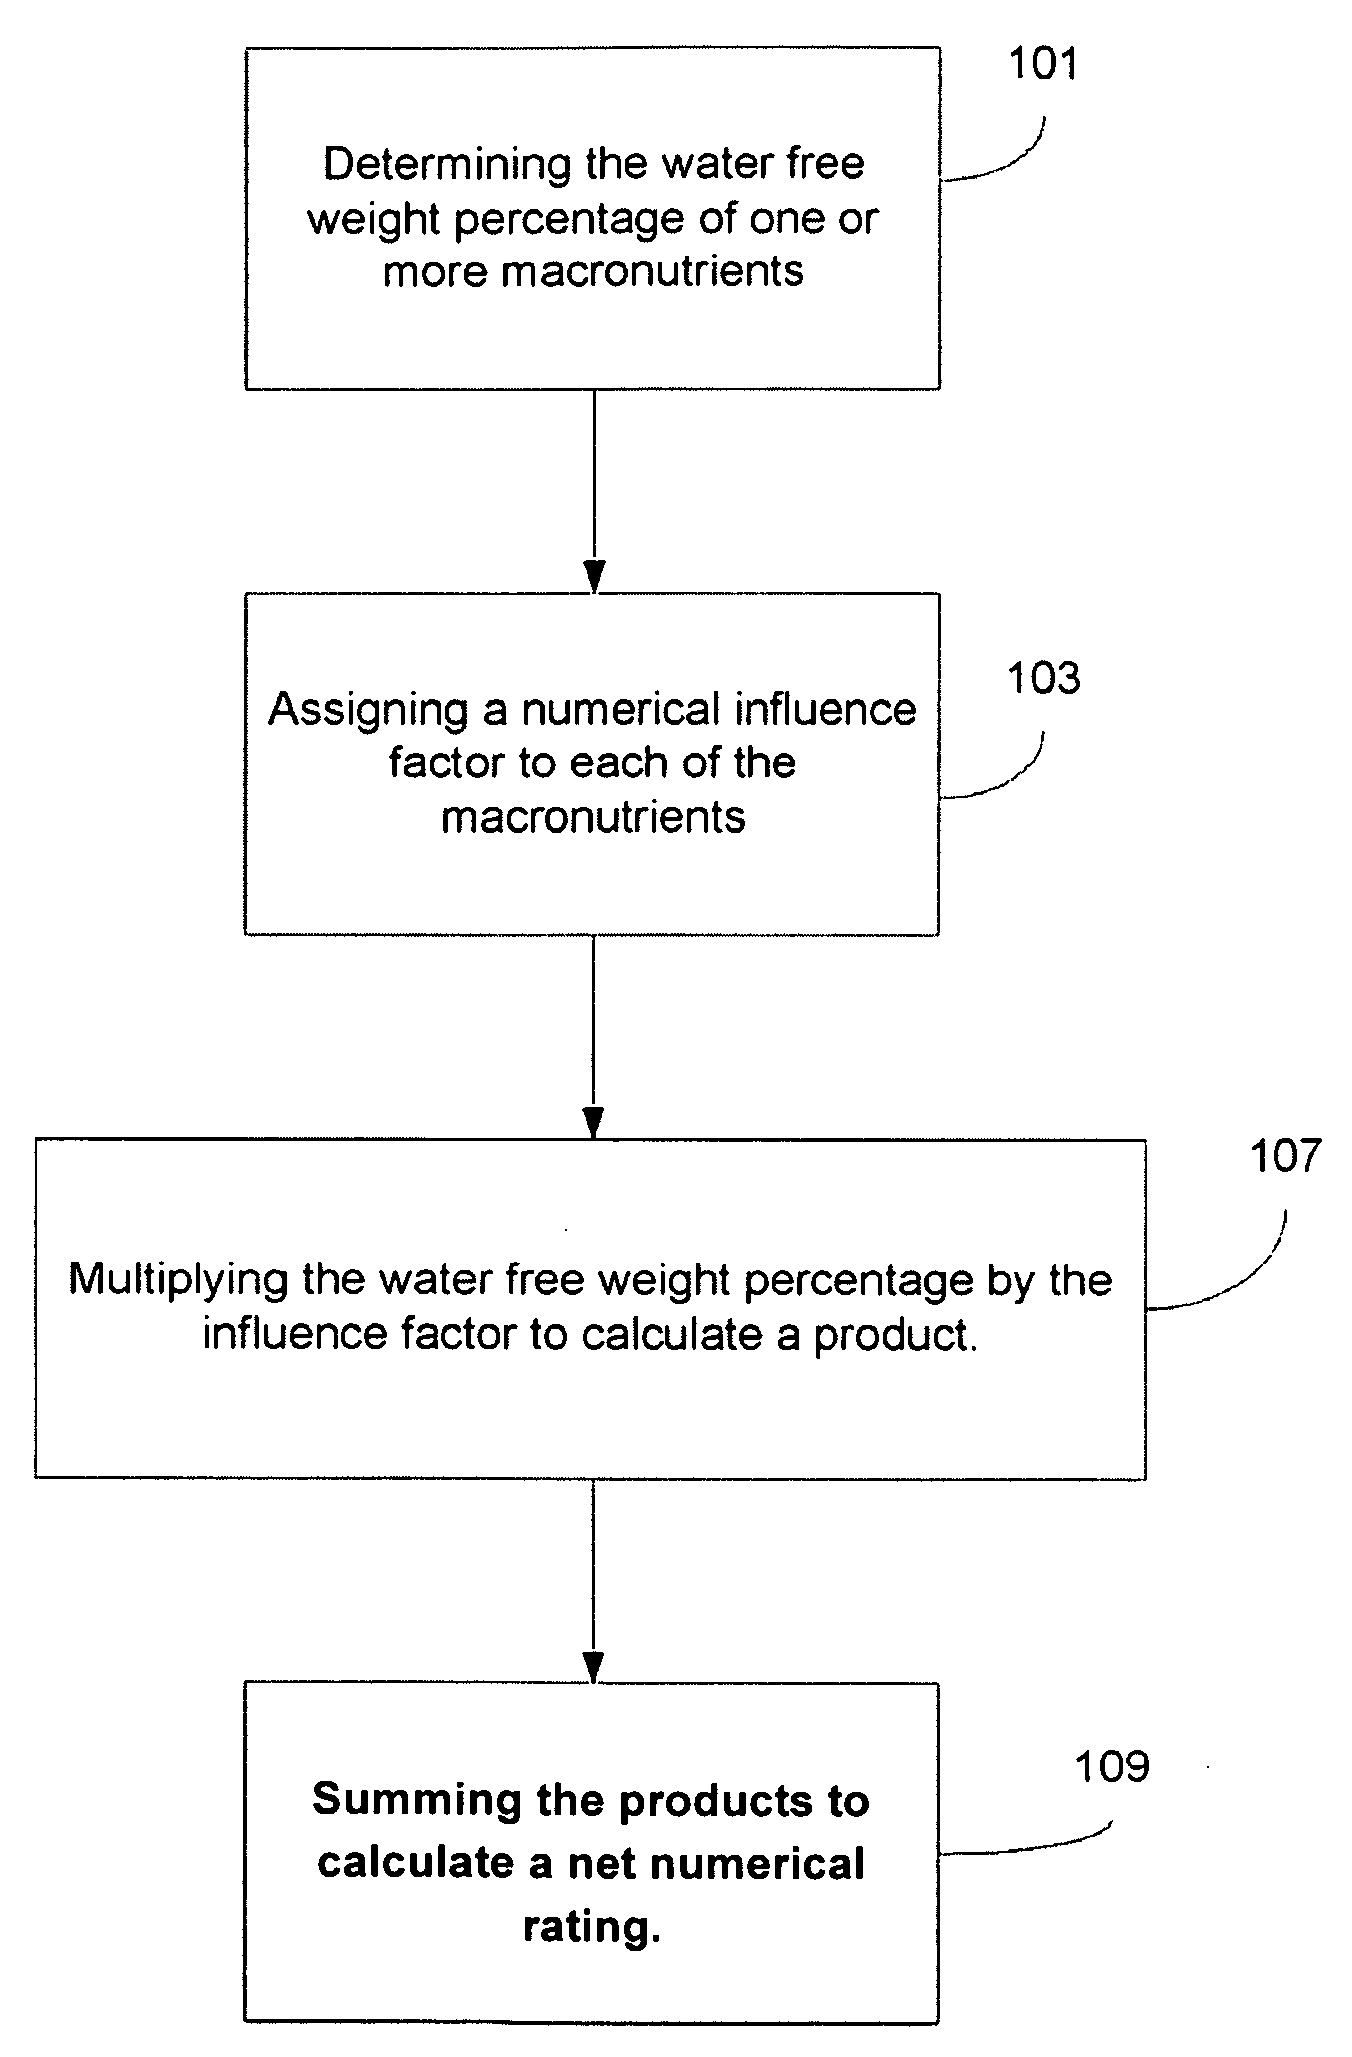 System and Method for Rating the Nutritional Quality of Food Items